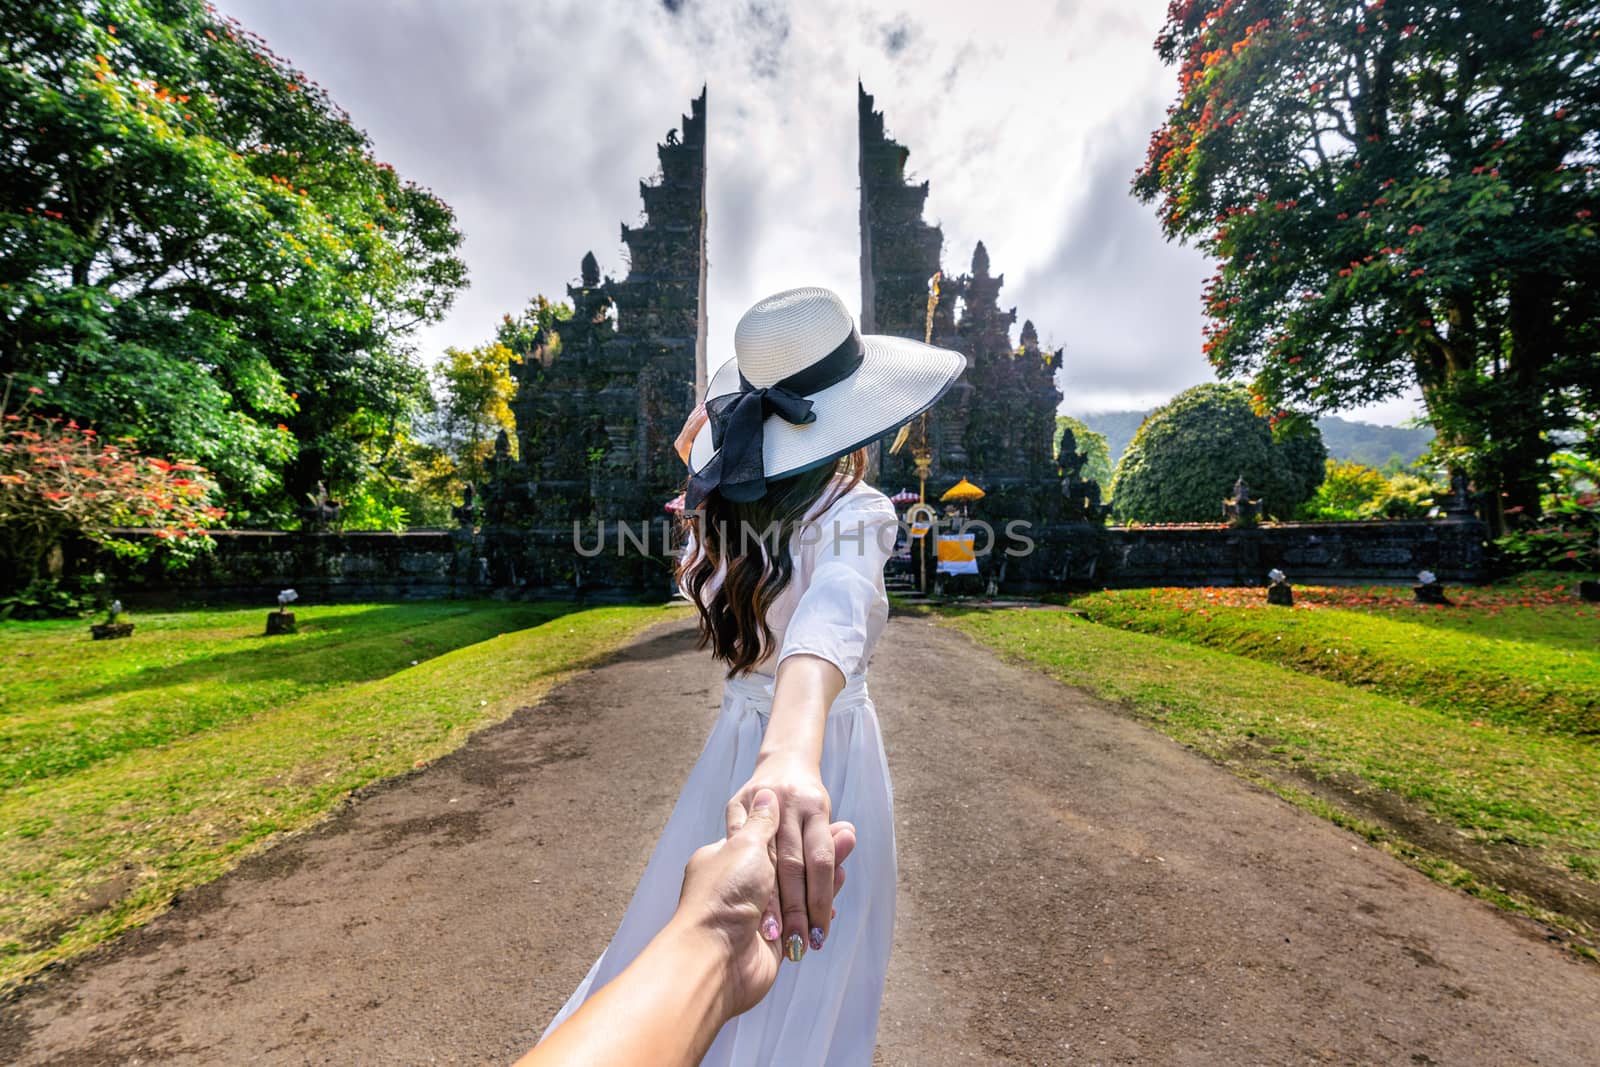 Women tourists holding man's hand and leading him to Big Gate in Bali, Indonesia.